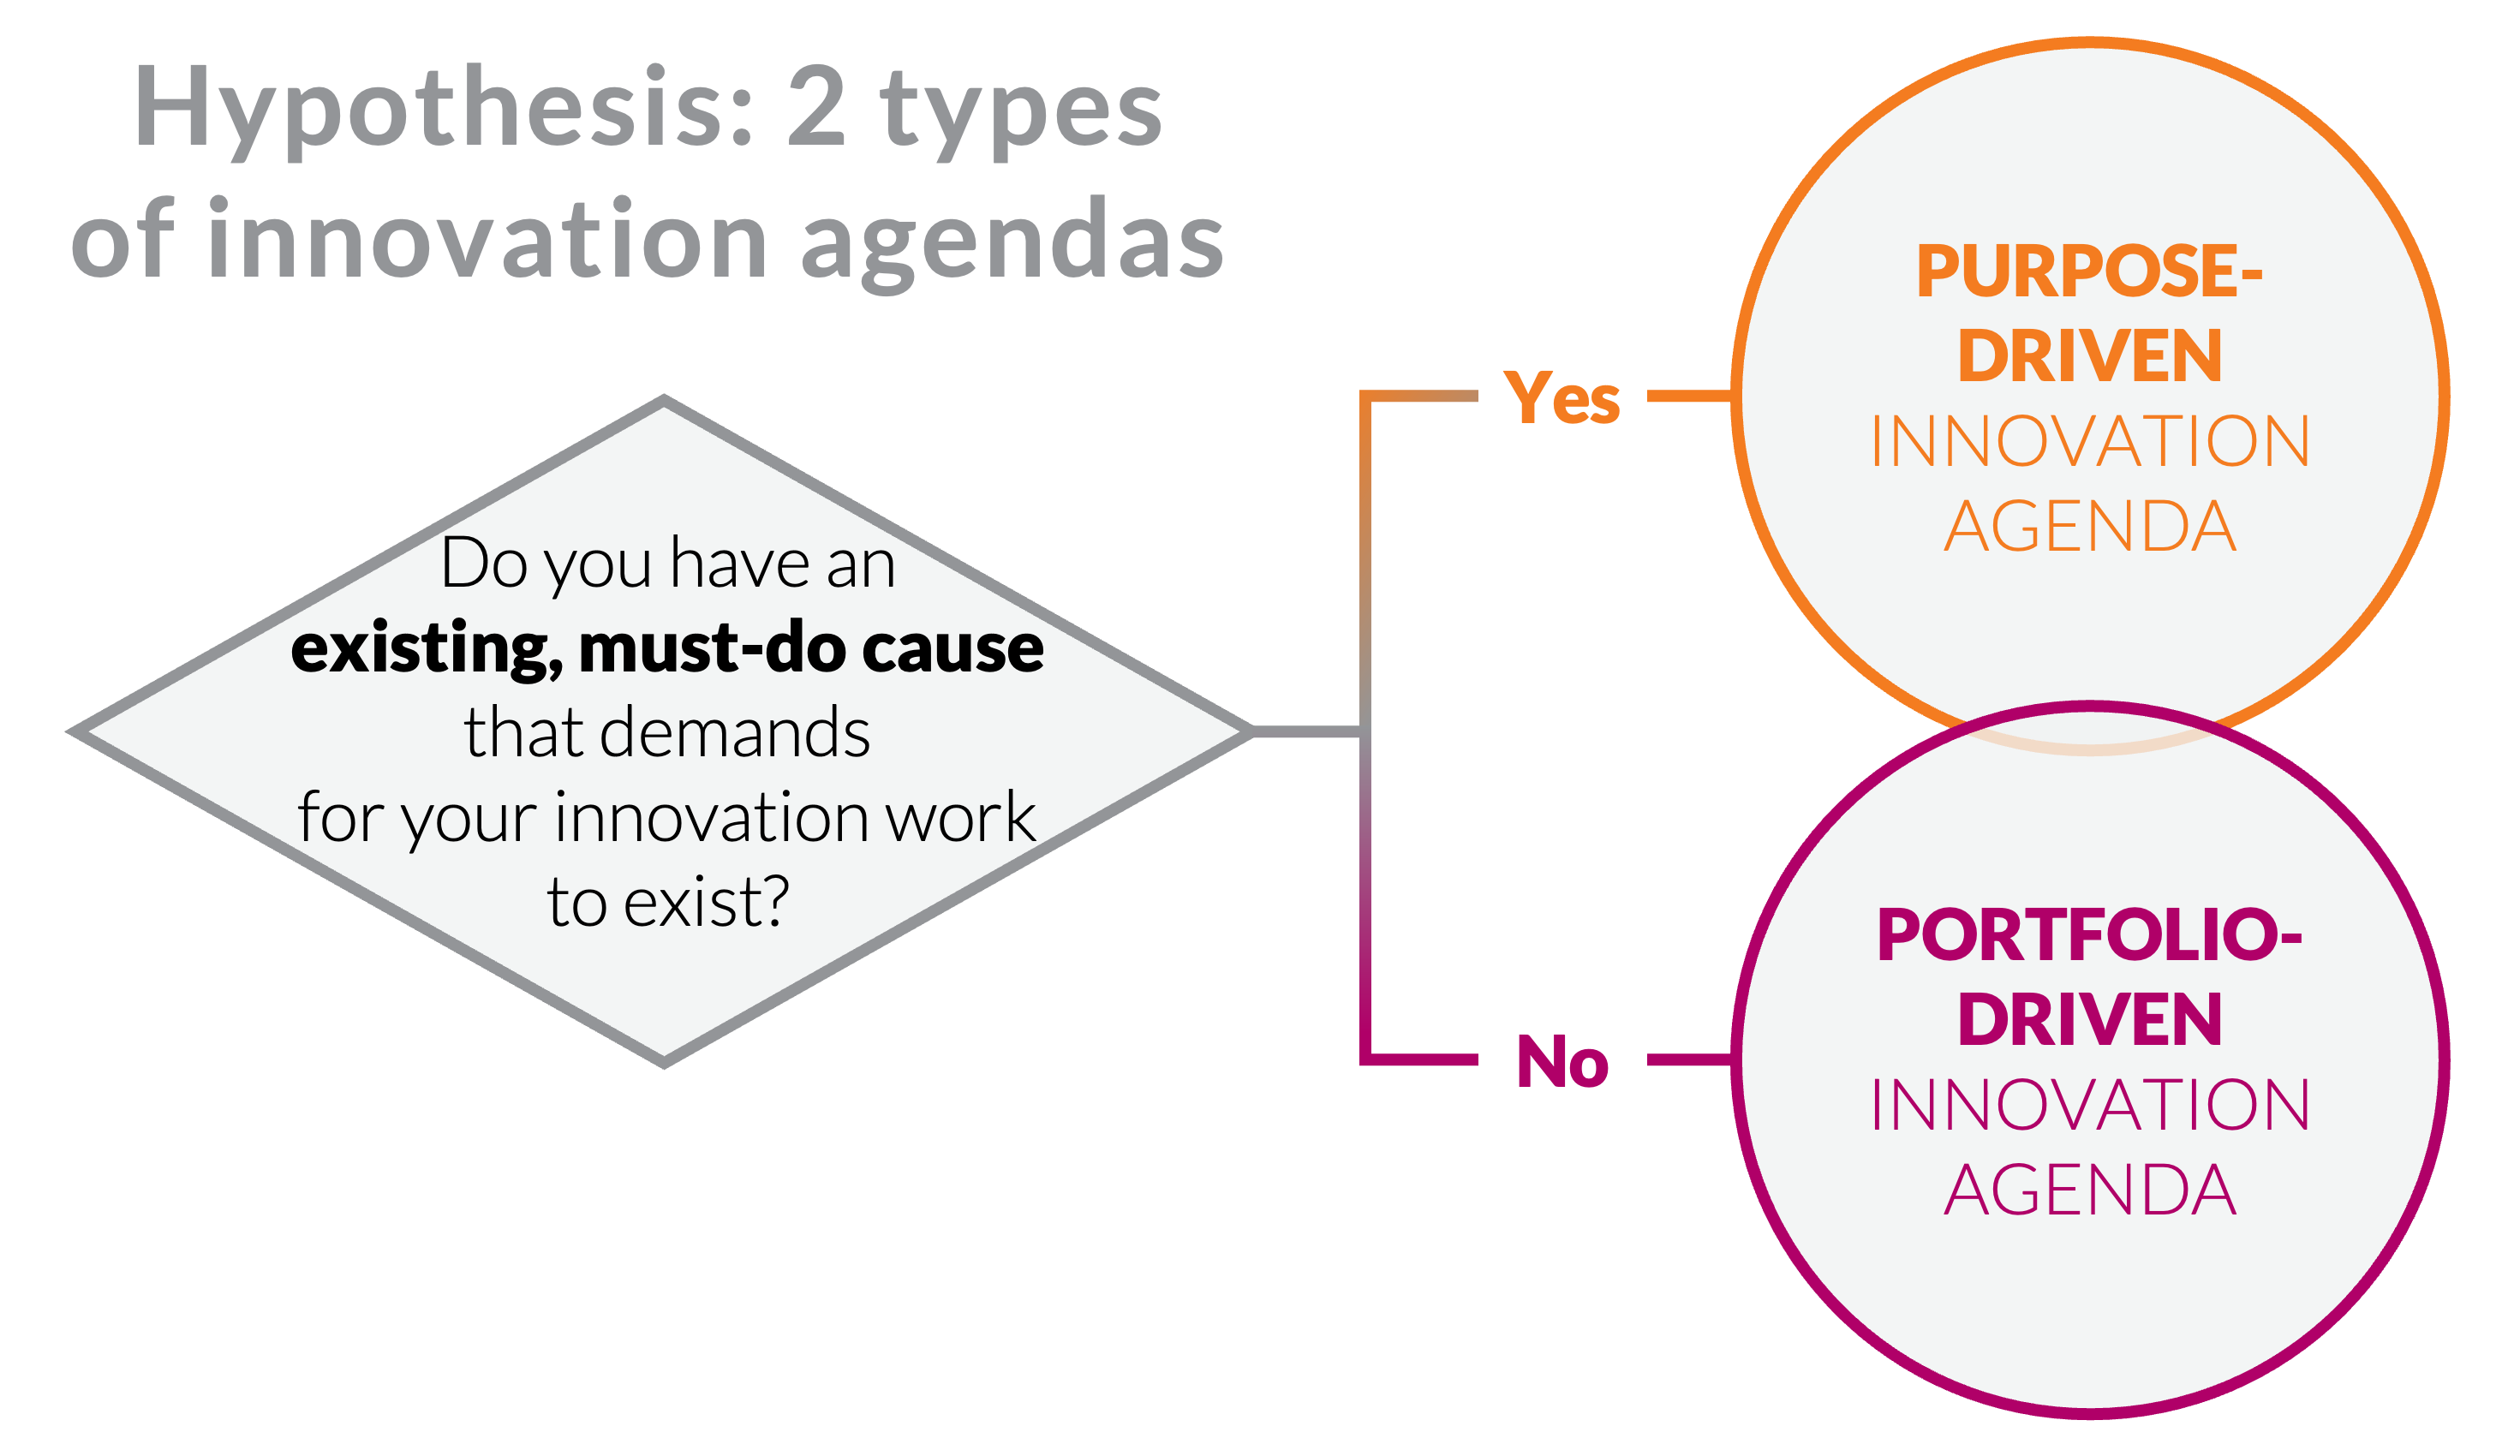 Decision flow diagram: Teams with an existing must-do cause can use purpose-driven innovation agendas, others can use portfolio-driven agendas